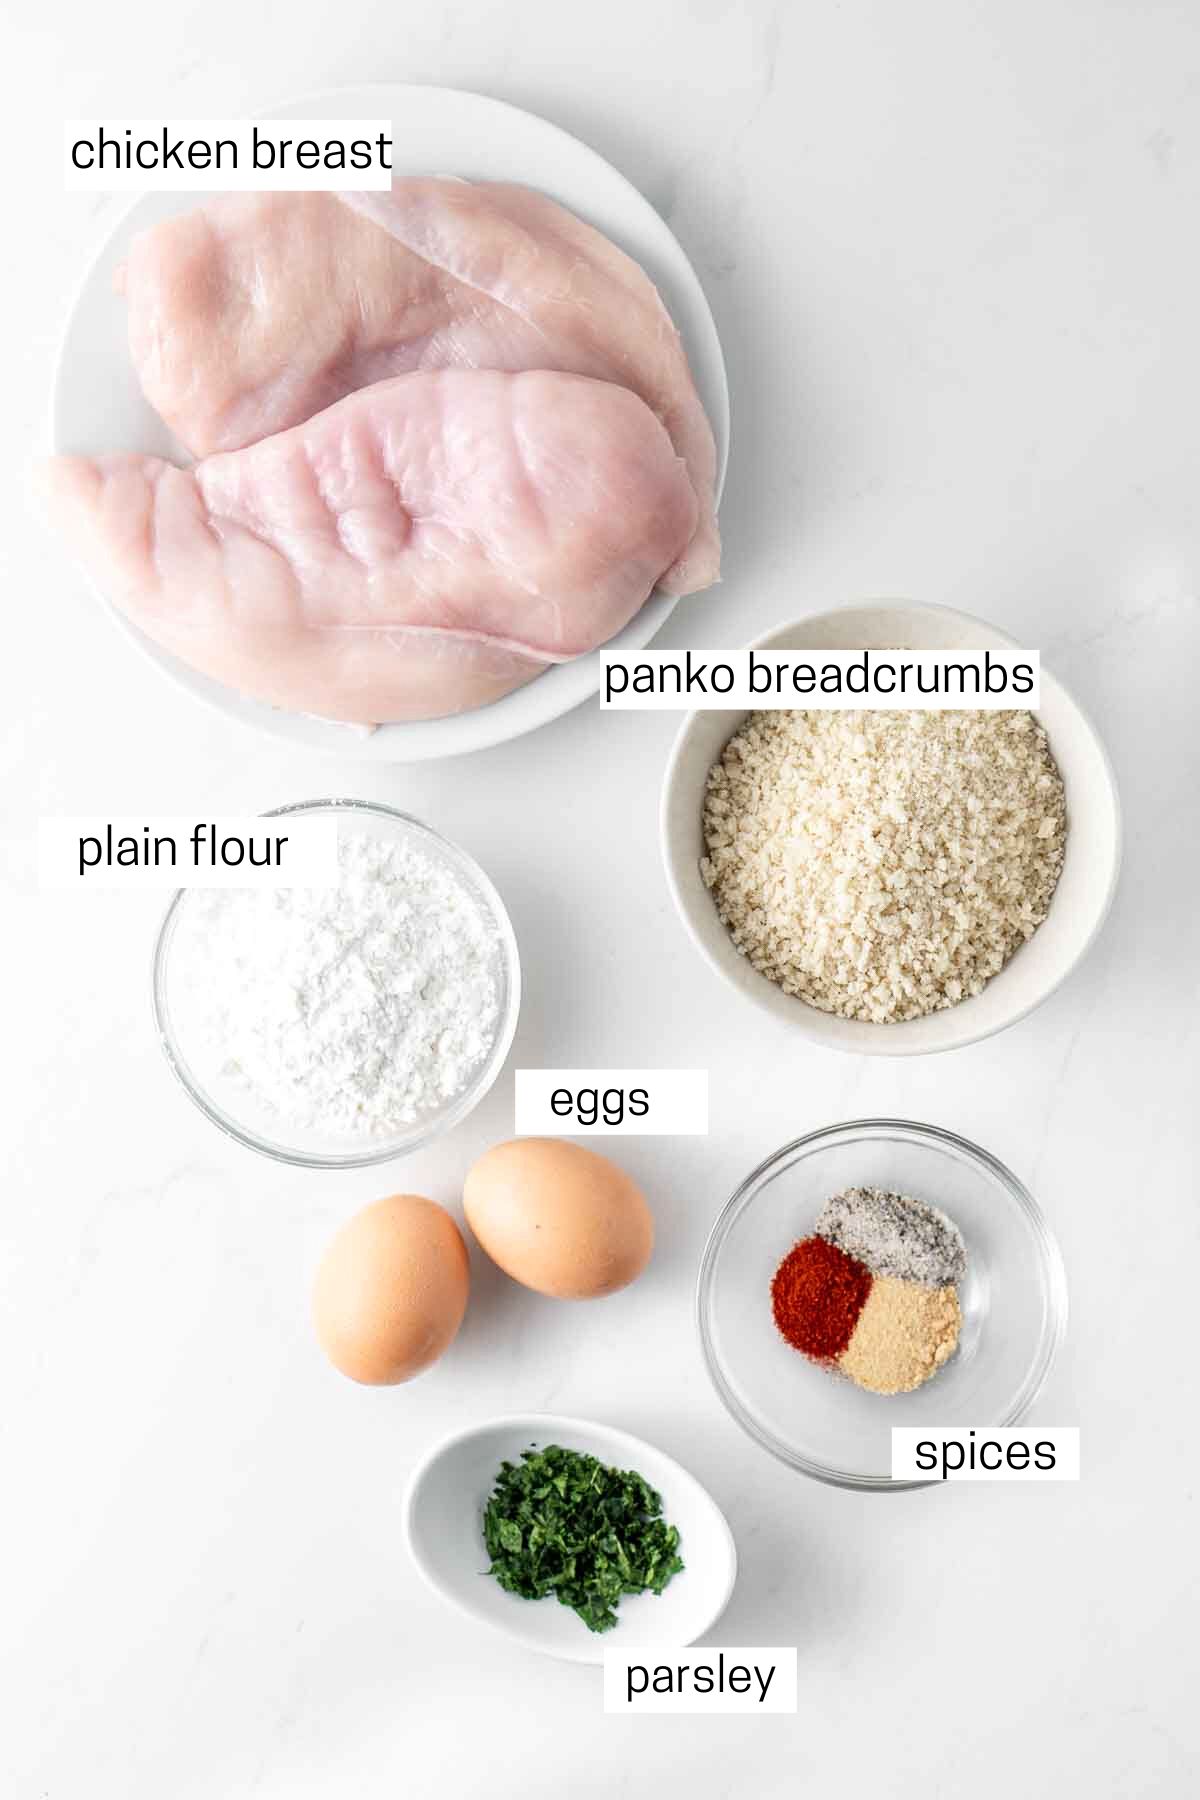 All ingredients needed for chicken schnitzel laid out in small bowls.